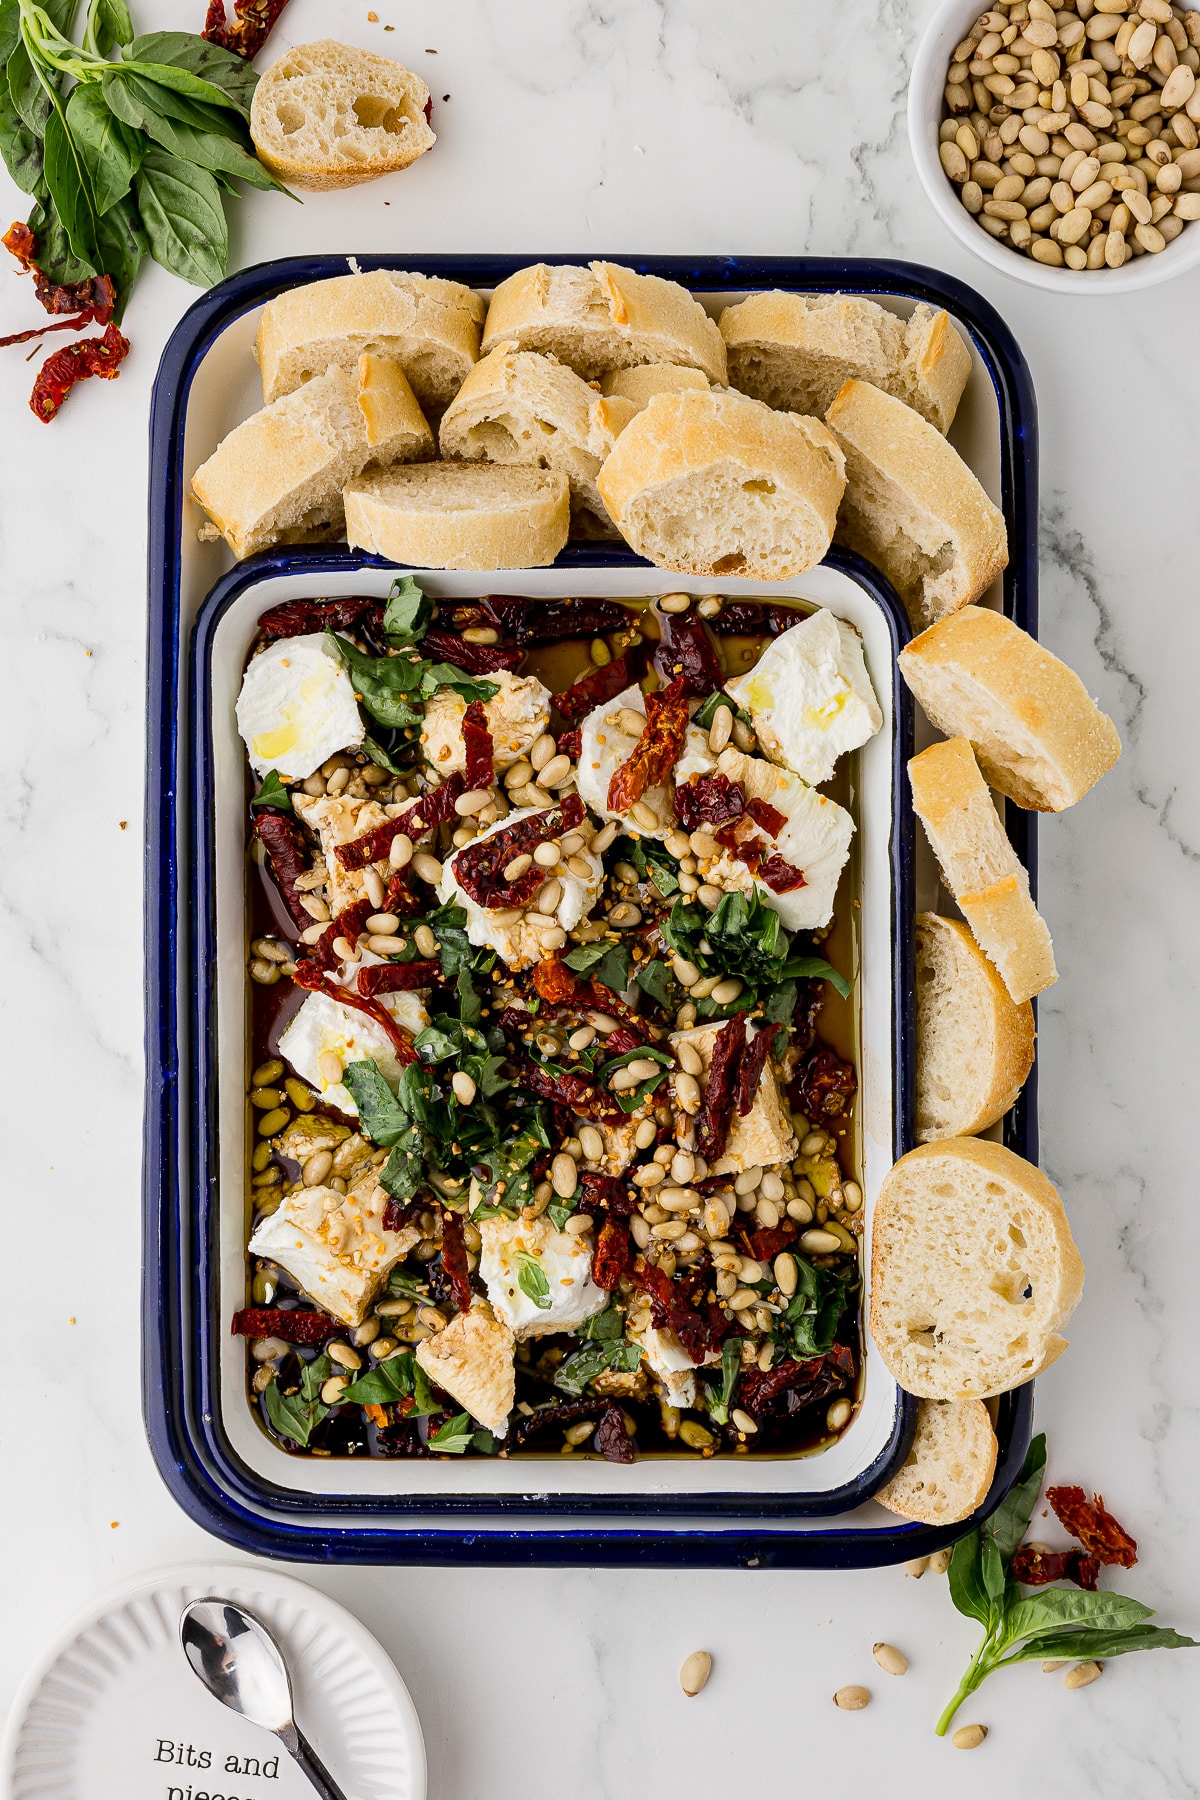 goat cheese appetizer in a white serving dish, surrounded by bread slices on a white marble countertop, a bowl of pine nuts and scraps surrounding the dishes.